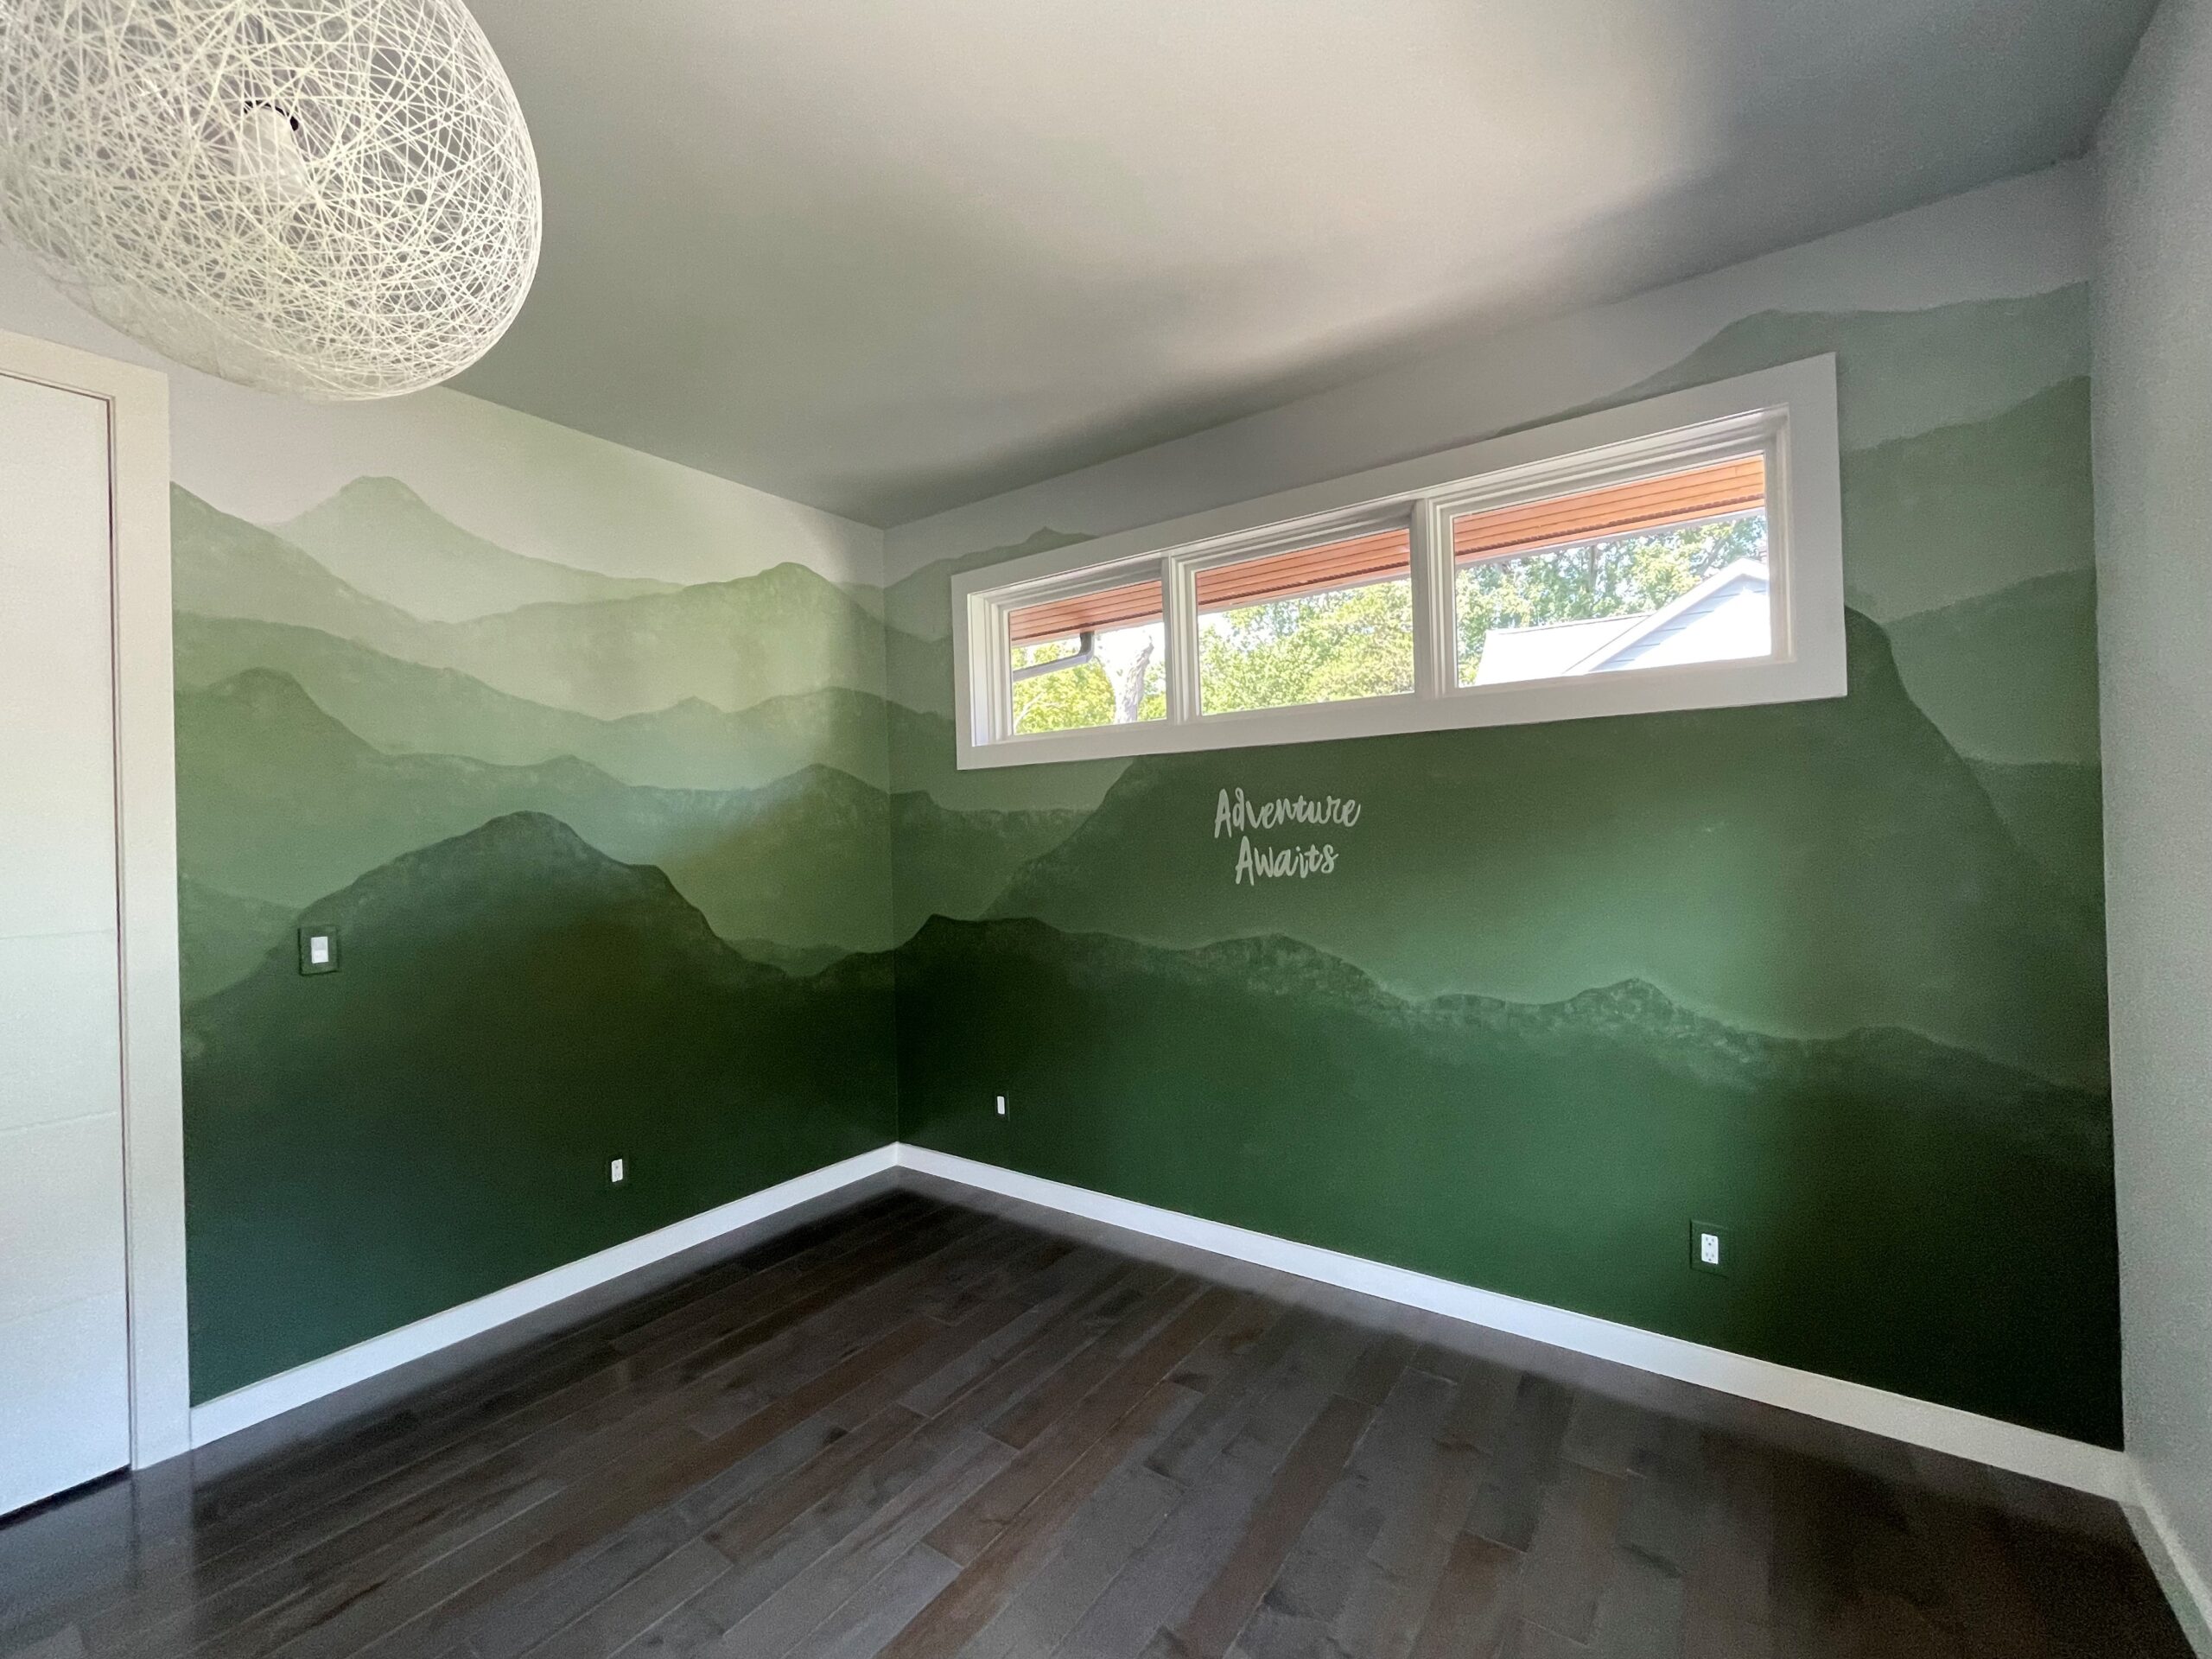 "Adventure Awaits" nursery mural with soft graphic mountain range in shades of green.